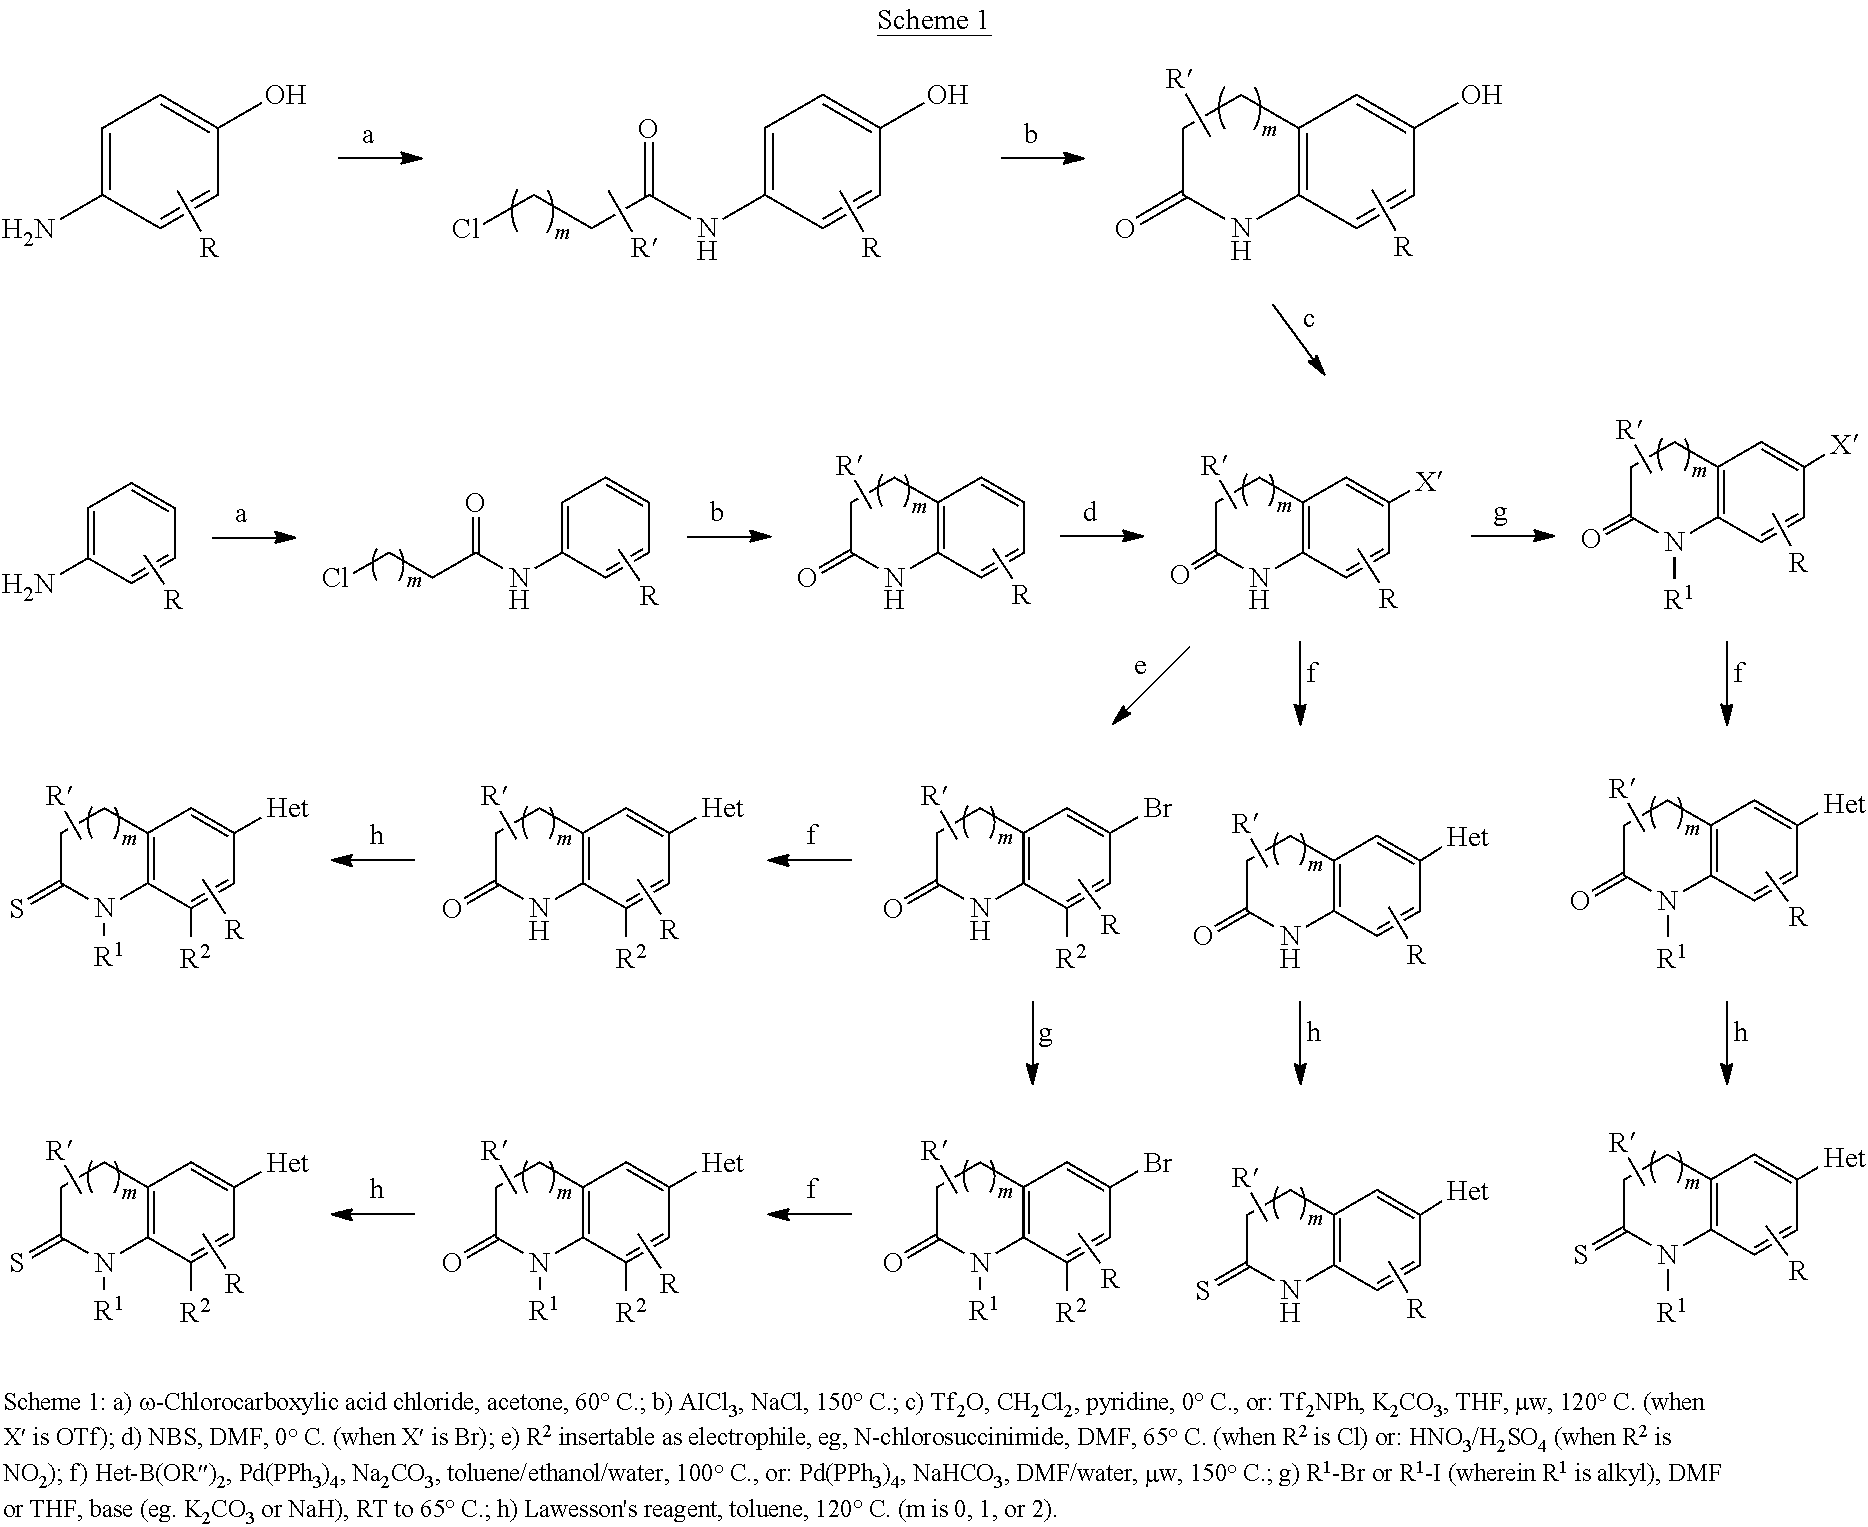 Inhibitors of the Human Aldosterone Sythase CYP11B2